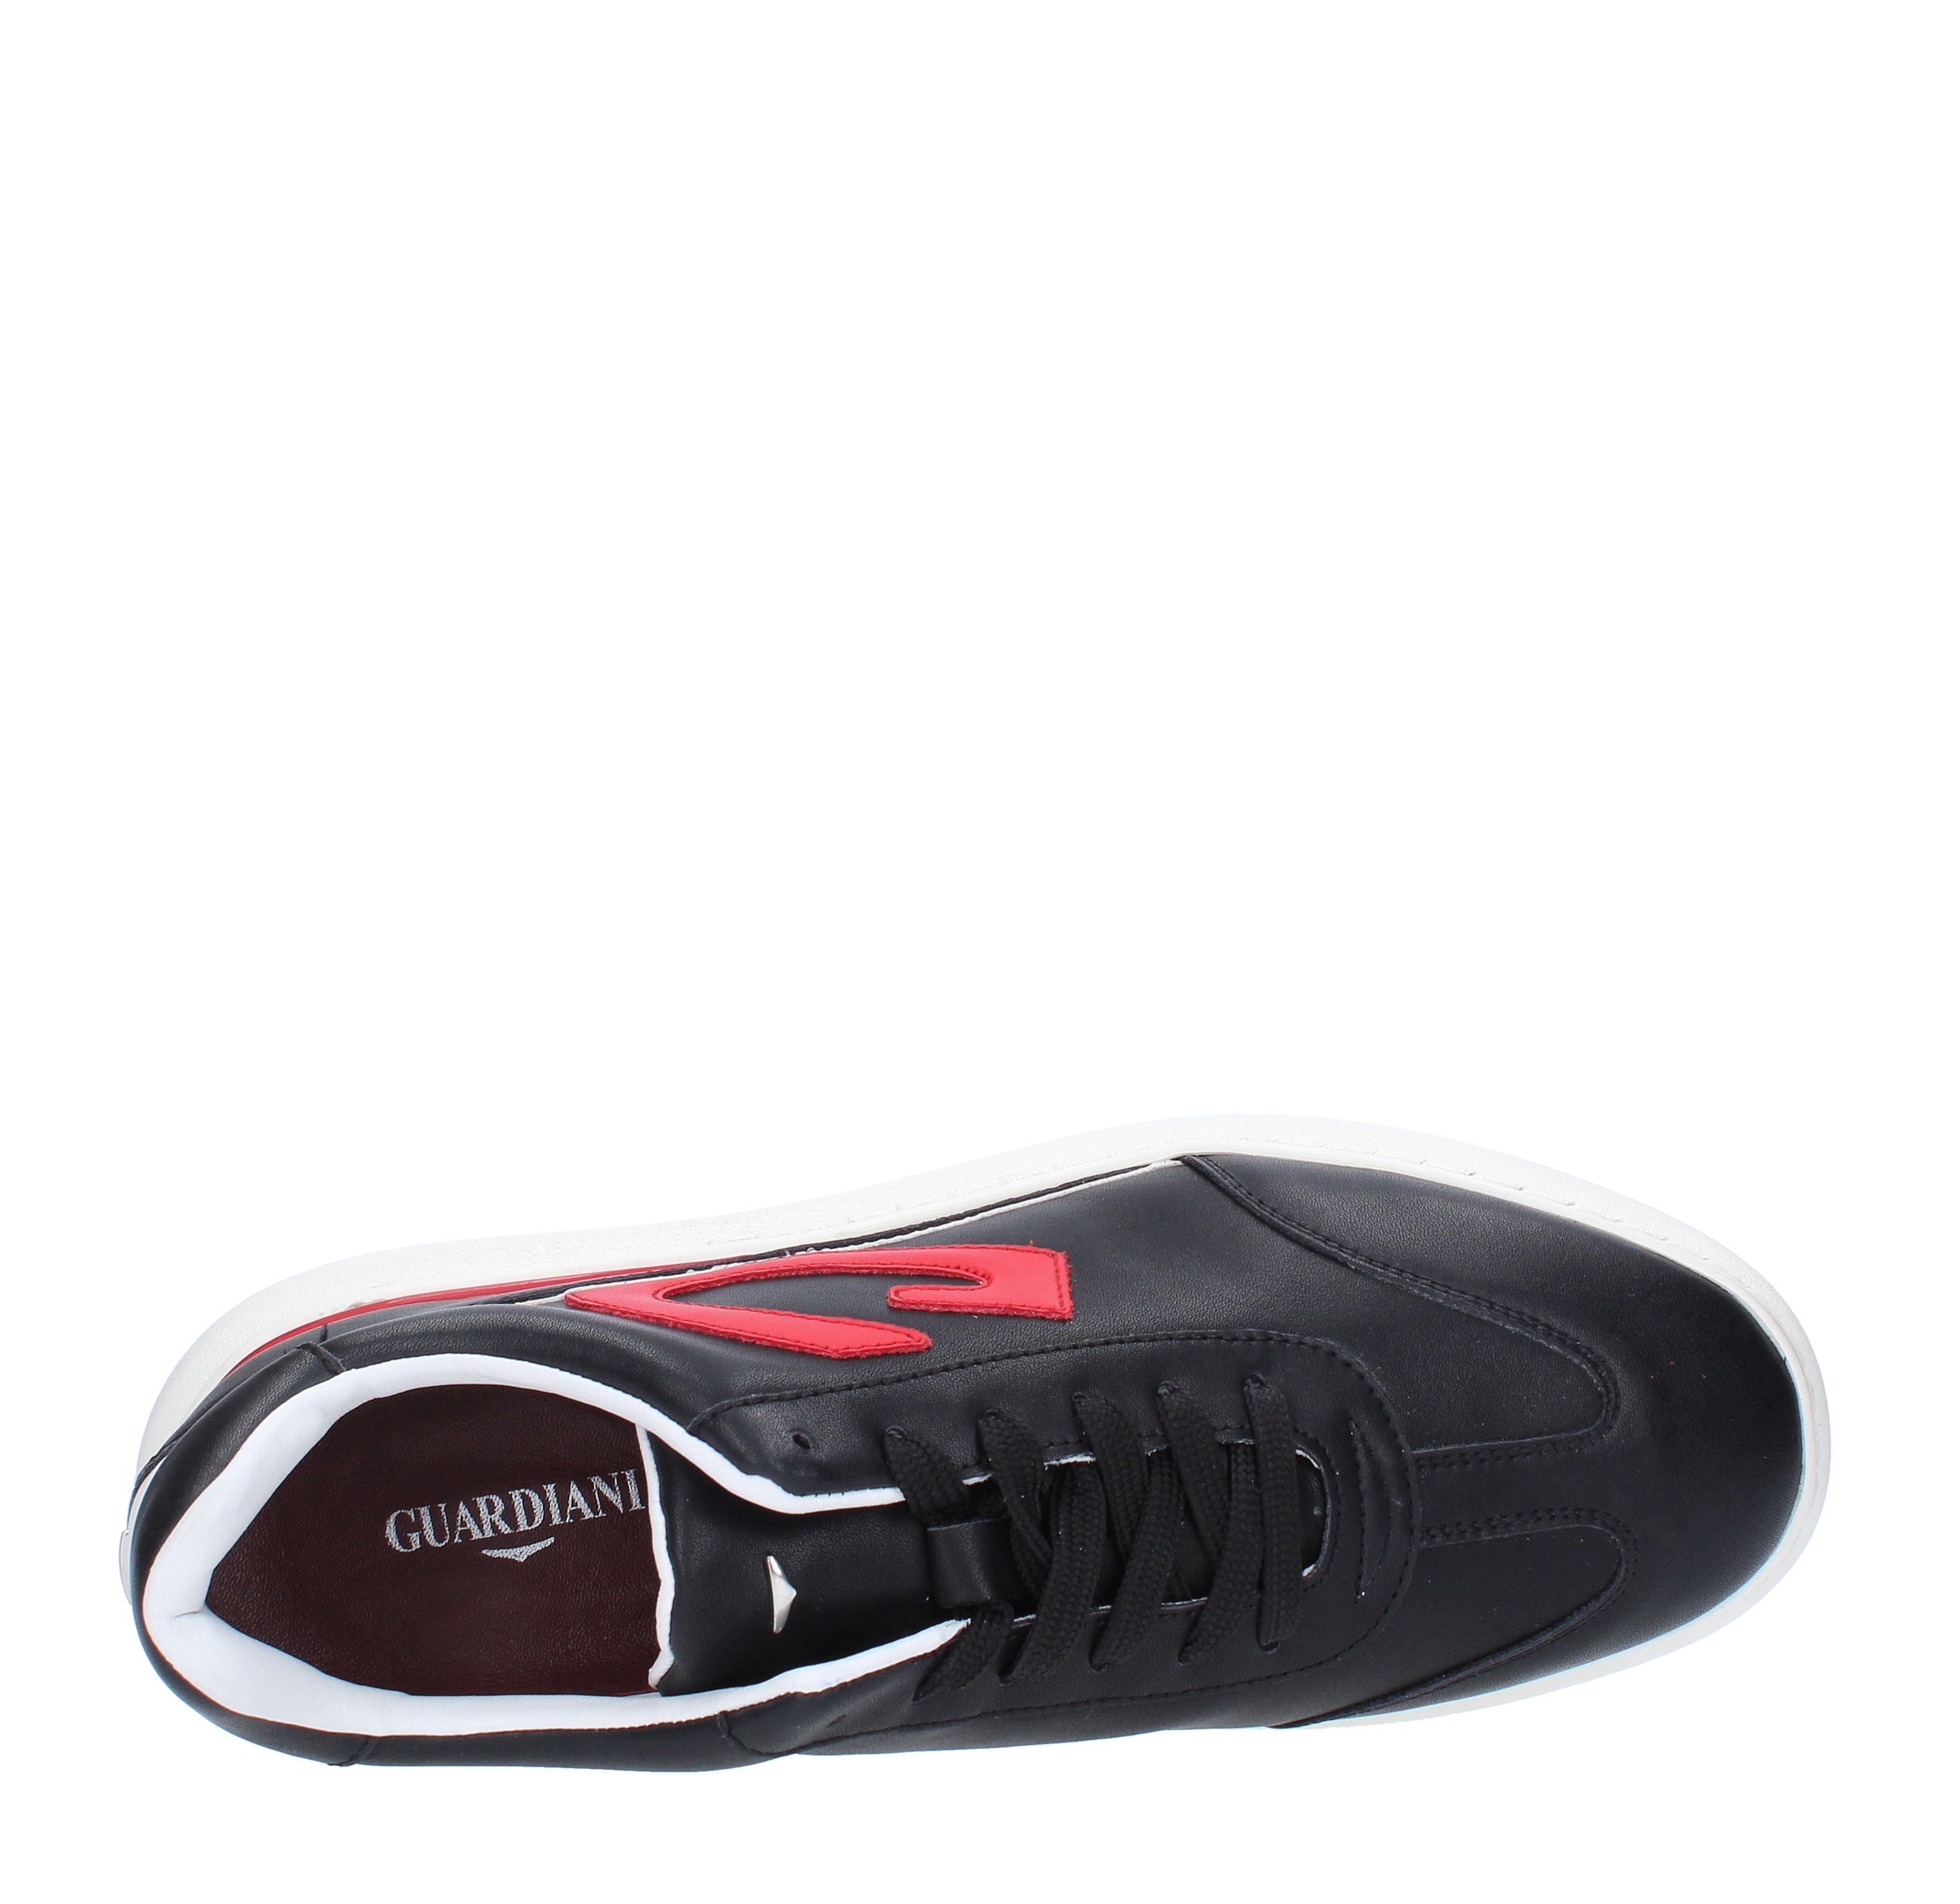 Leather sneakers GUARDIANI | AGM001702NERO ROSSO